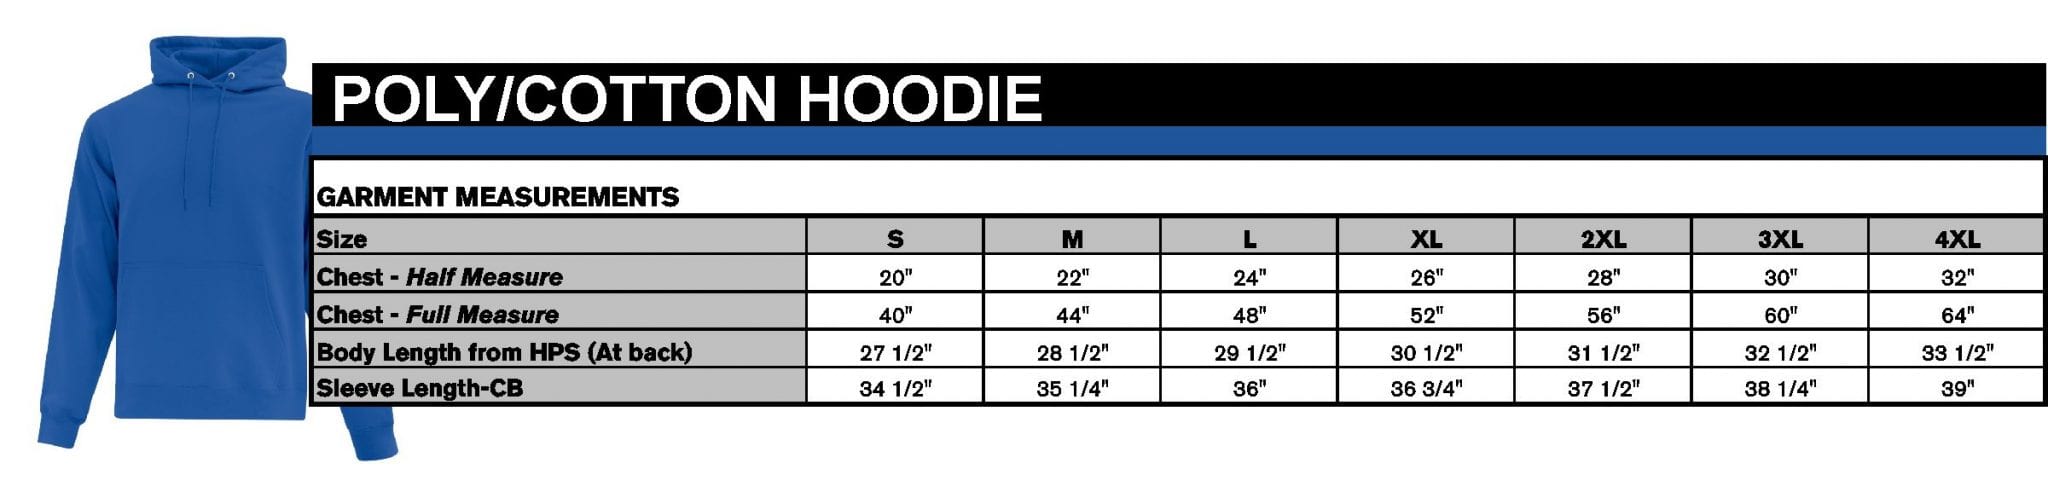 SIZING-CHARTS-POLY-COTTON-HOODIE-2048x498